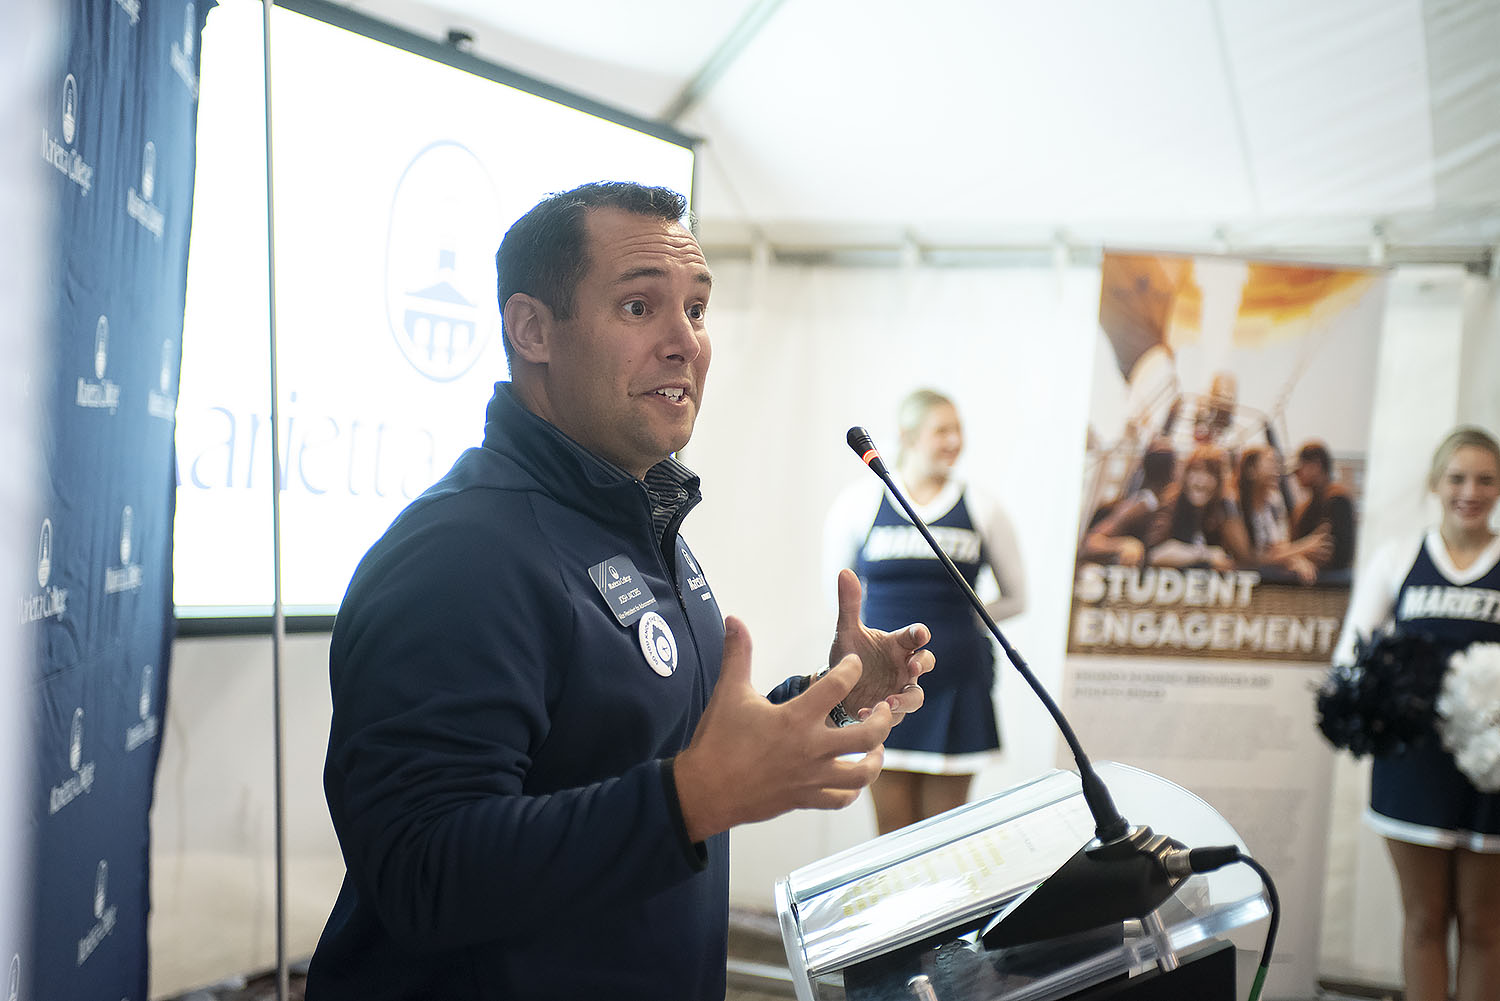 Josh Jacobs speaks under the tent at the All Alumni and Friends event